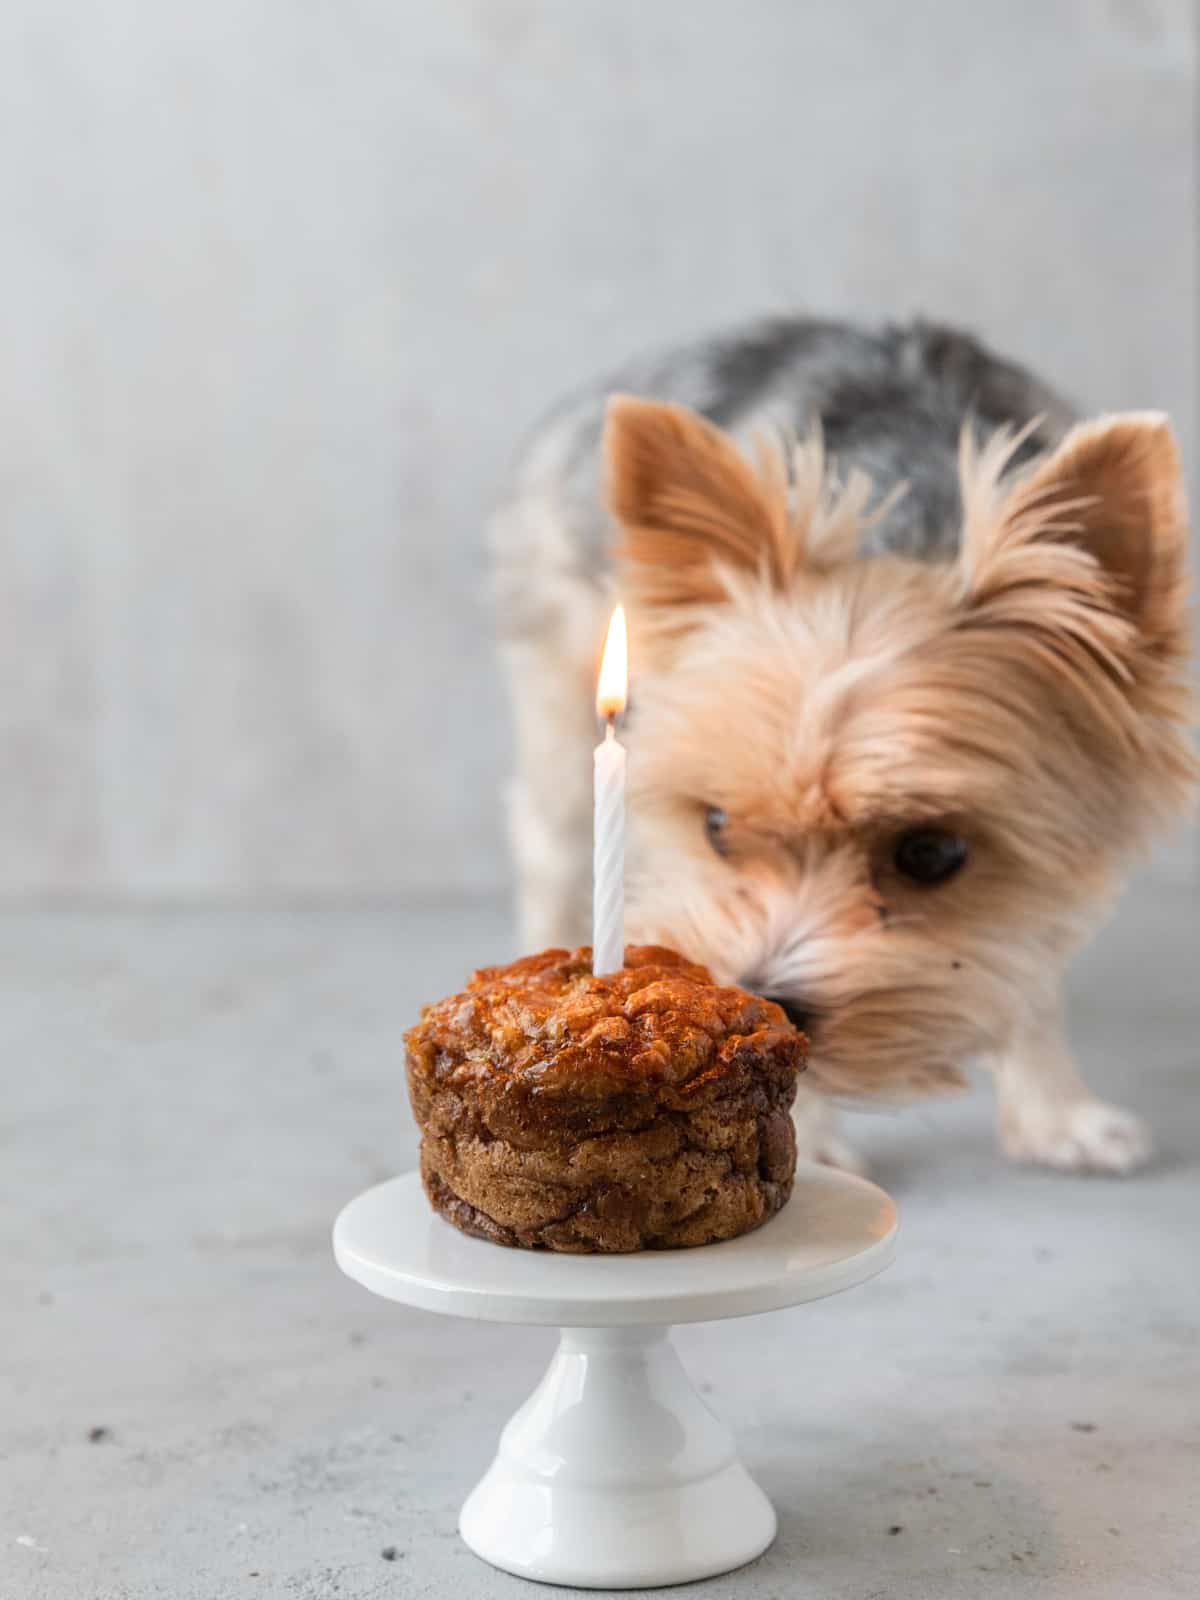 a small black and tan yorkie smelling a dog birthday cake with a lit candle in it.